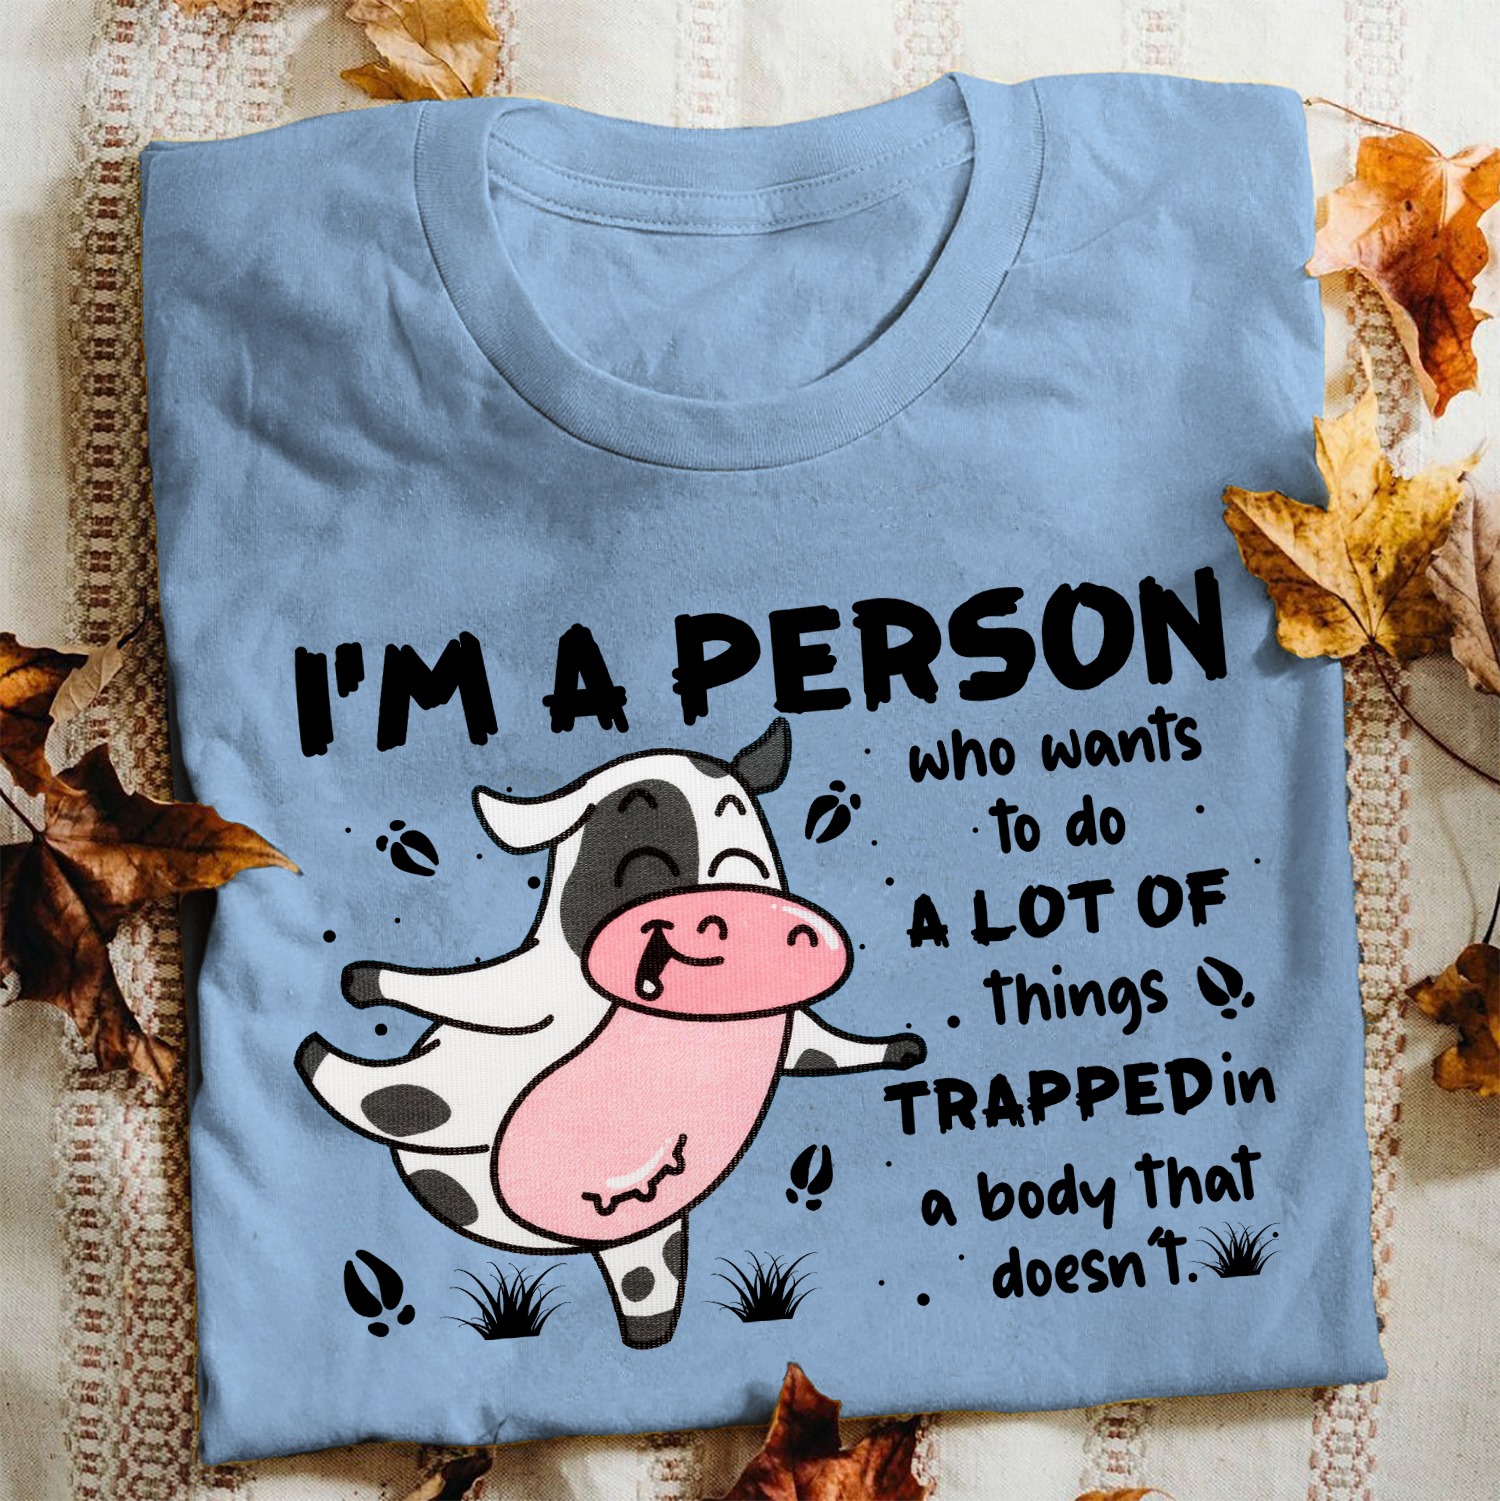 I'm a person who wants to do a lot of things trapped in a body that doesn't - Grumpy cow